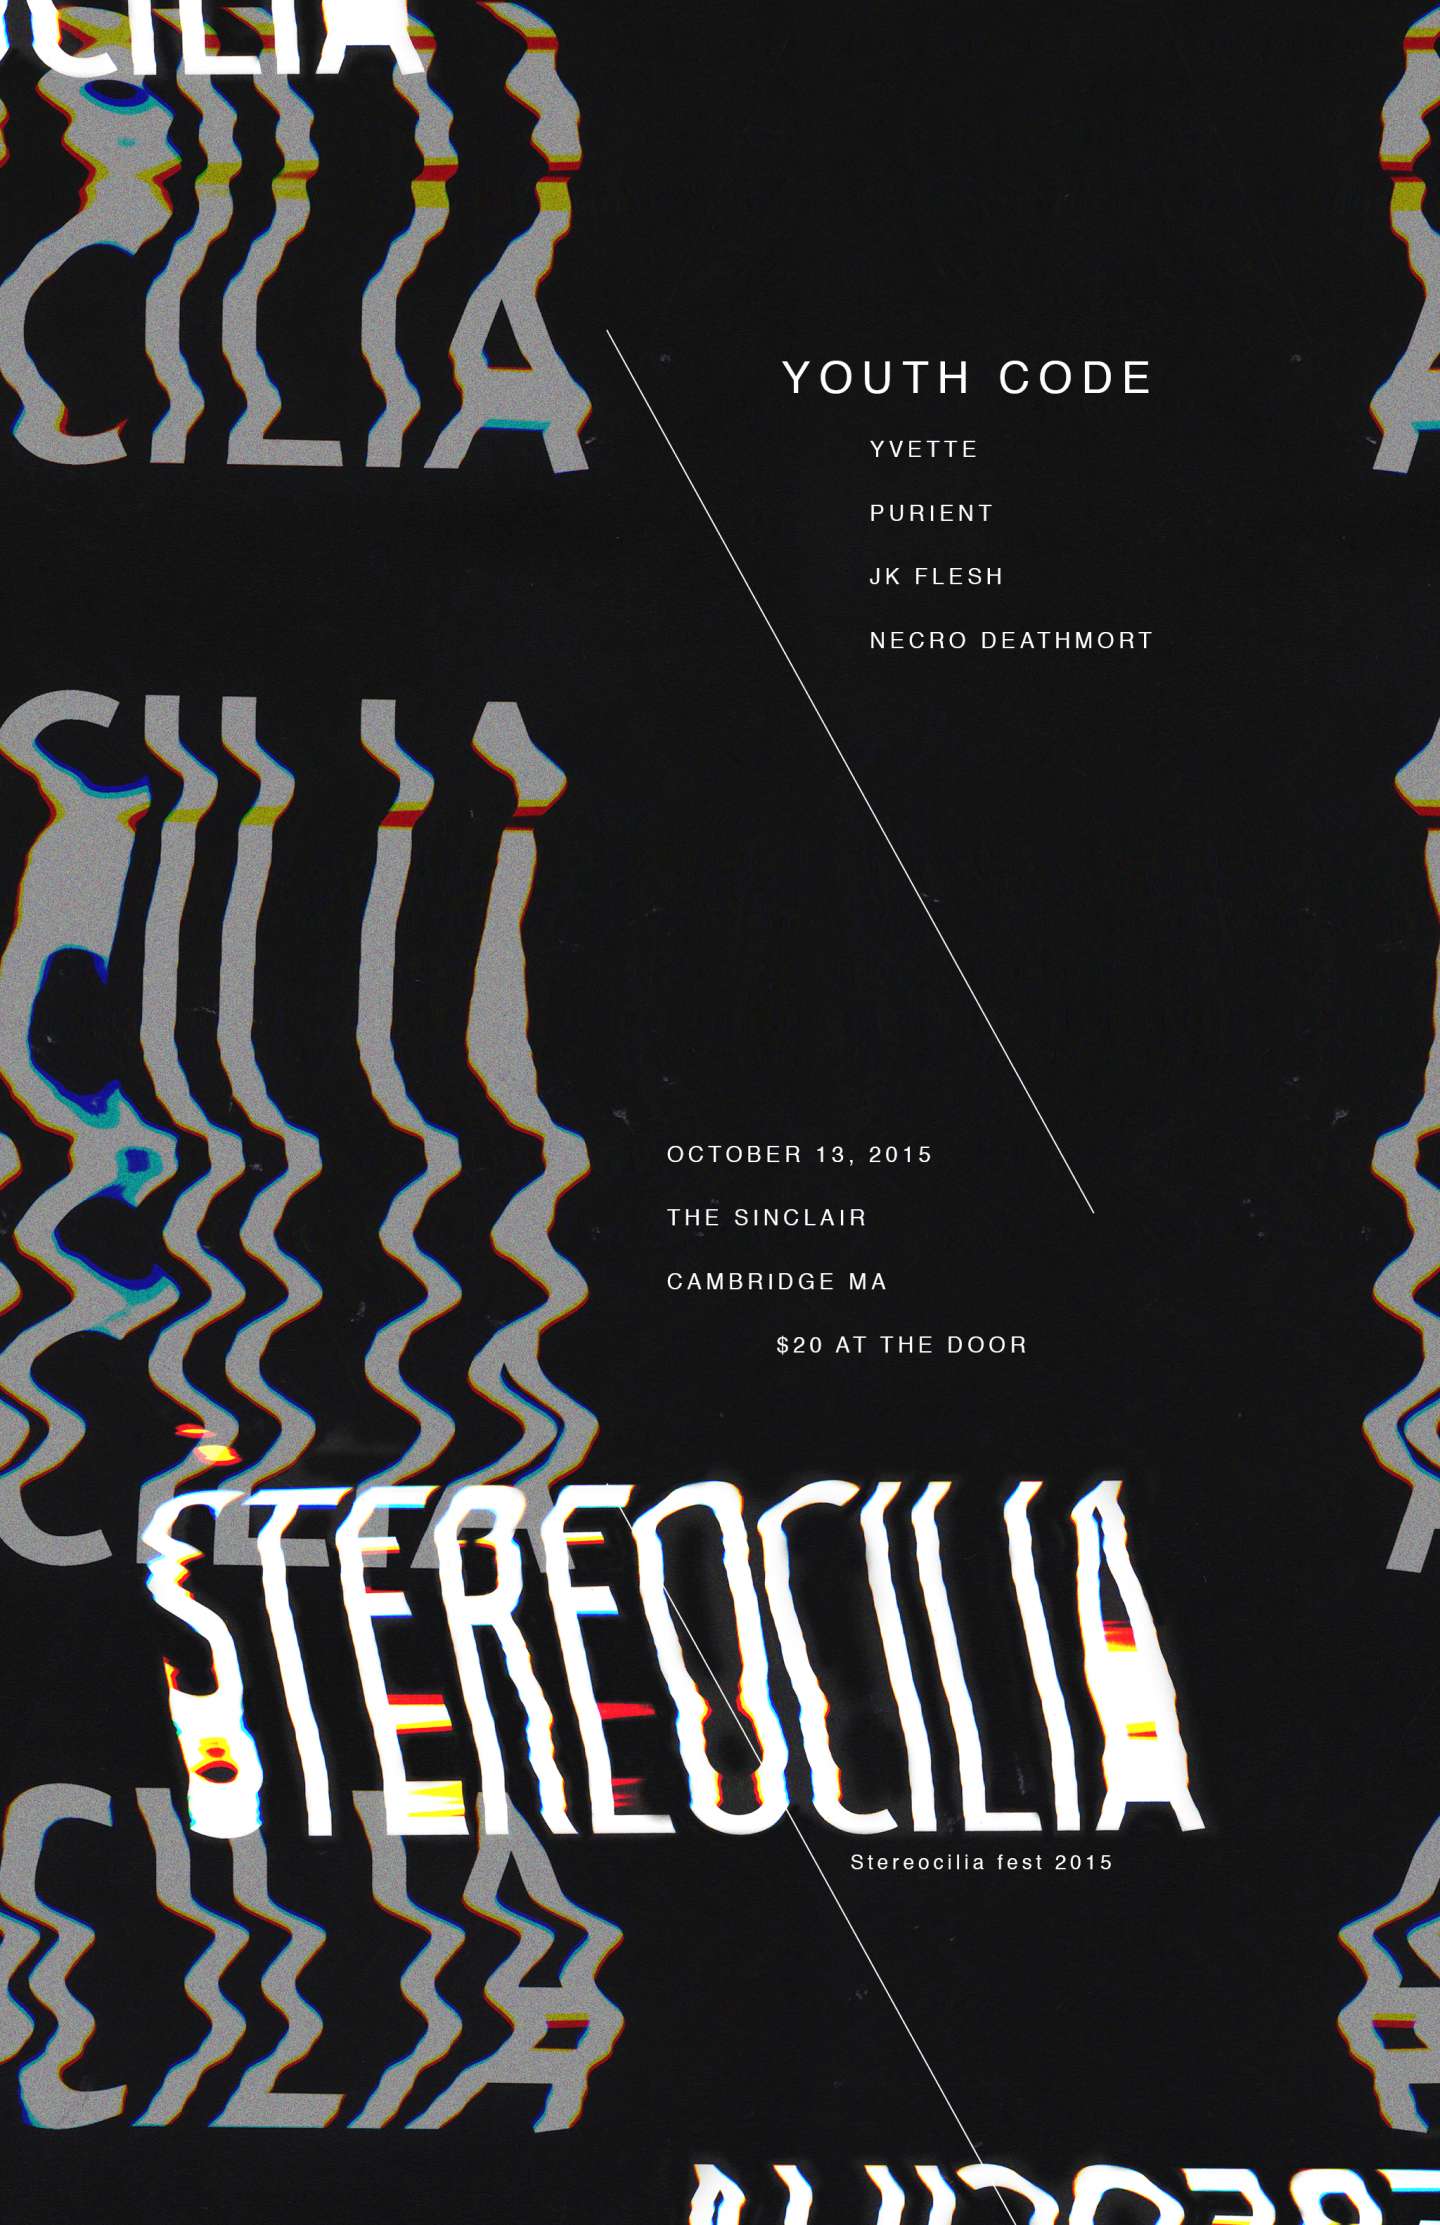 Stereocilia Sound - an ambient noise record label